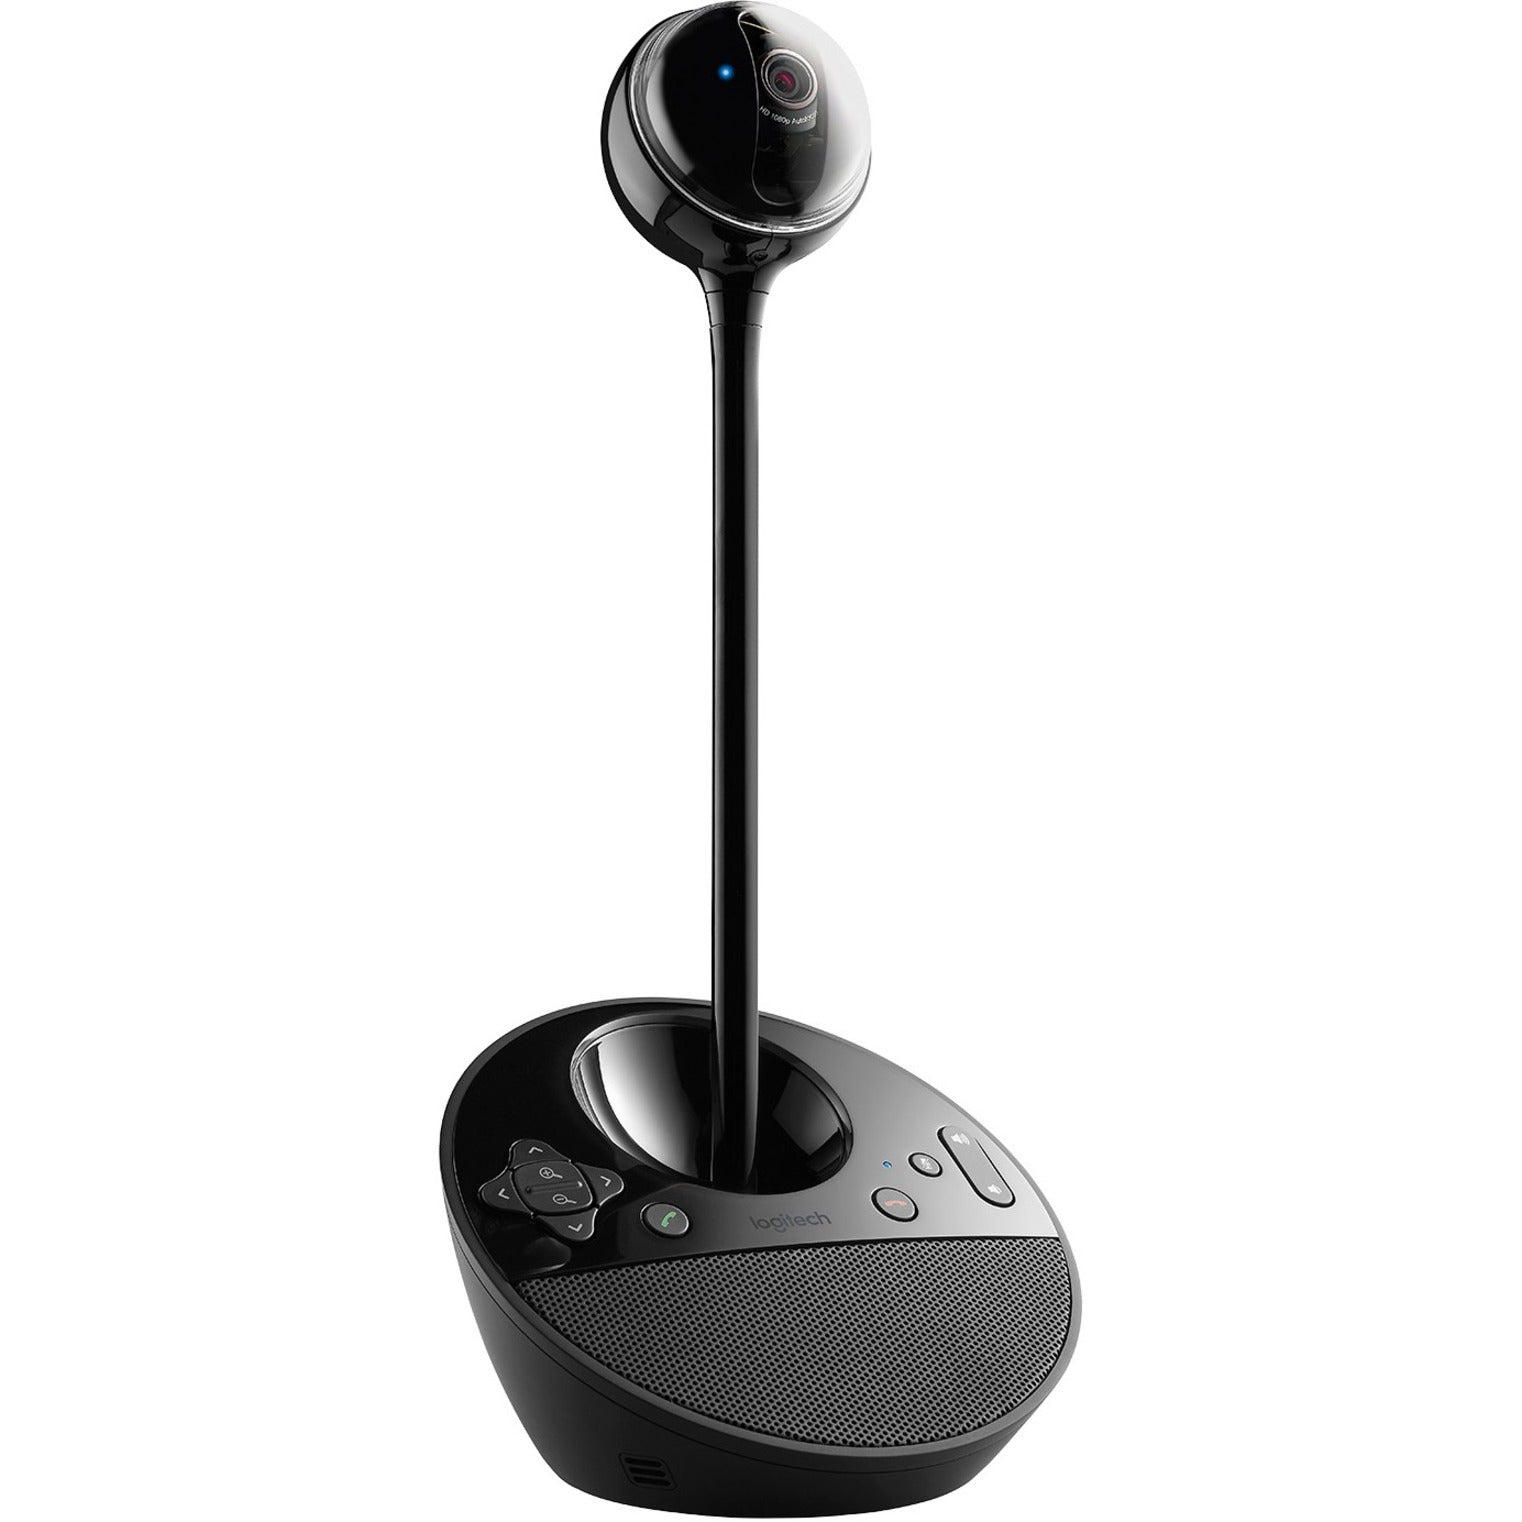 Logitech 960-000866 BCC950 Conferencecam, Full HD Video Conferencing Camera